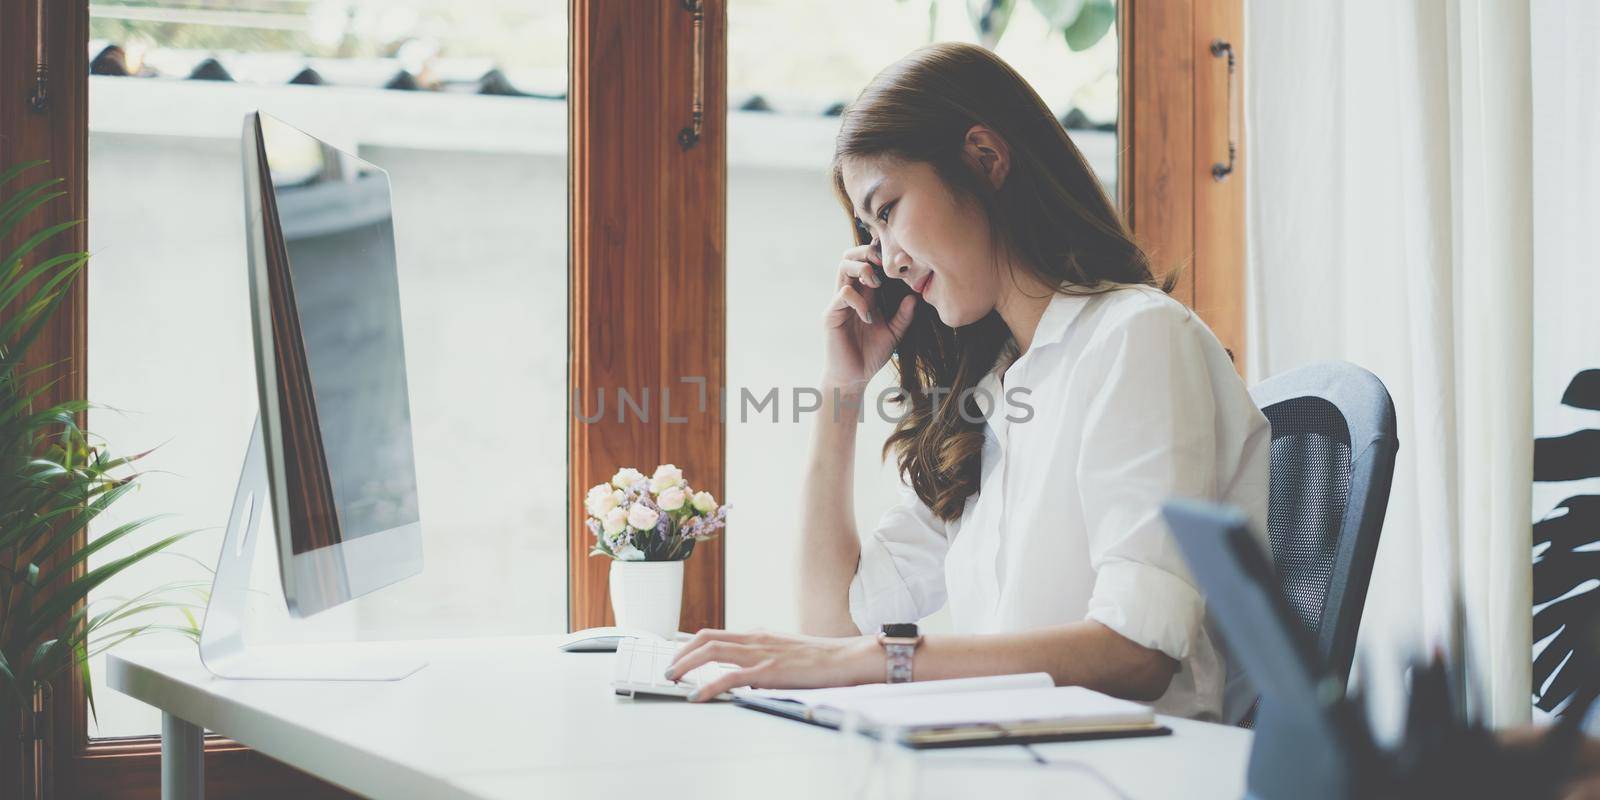 Job interview concept. Business woman questioning and listen to candidate answers during interview by video call on computer desktop